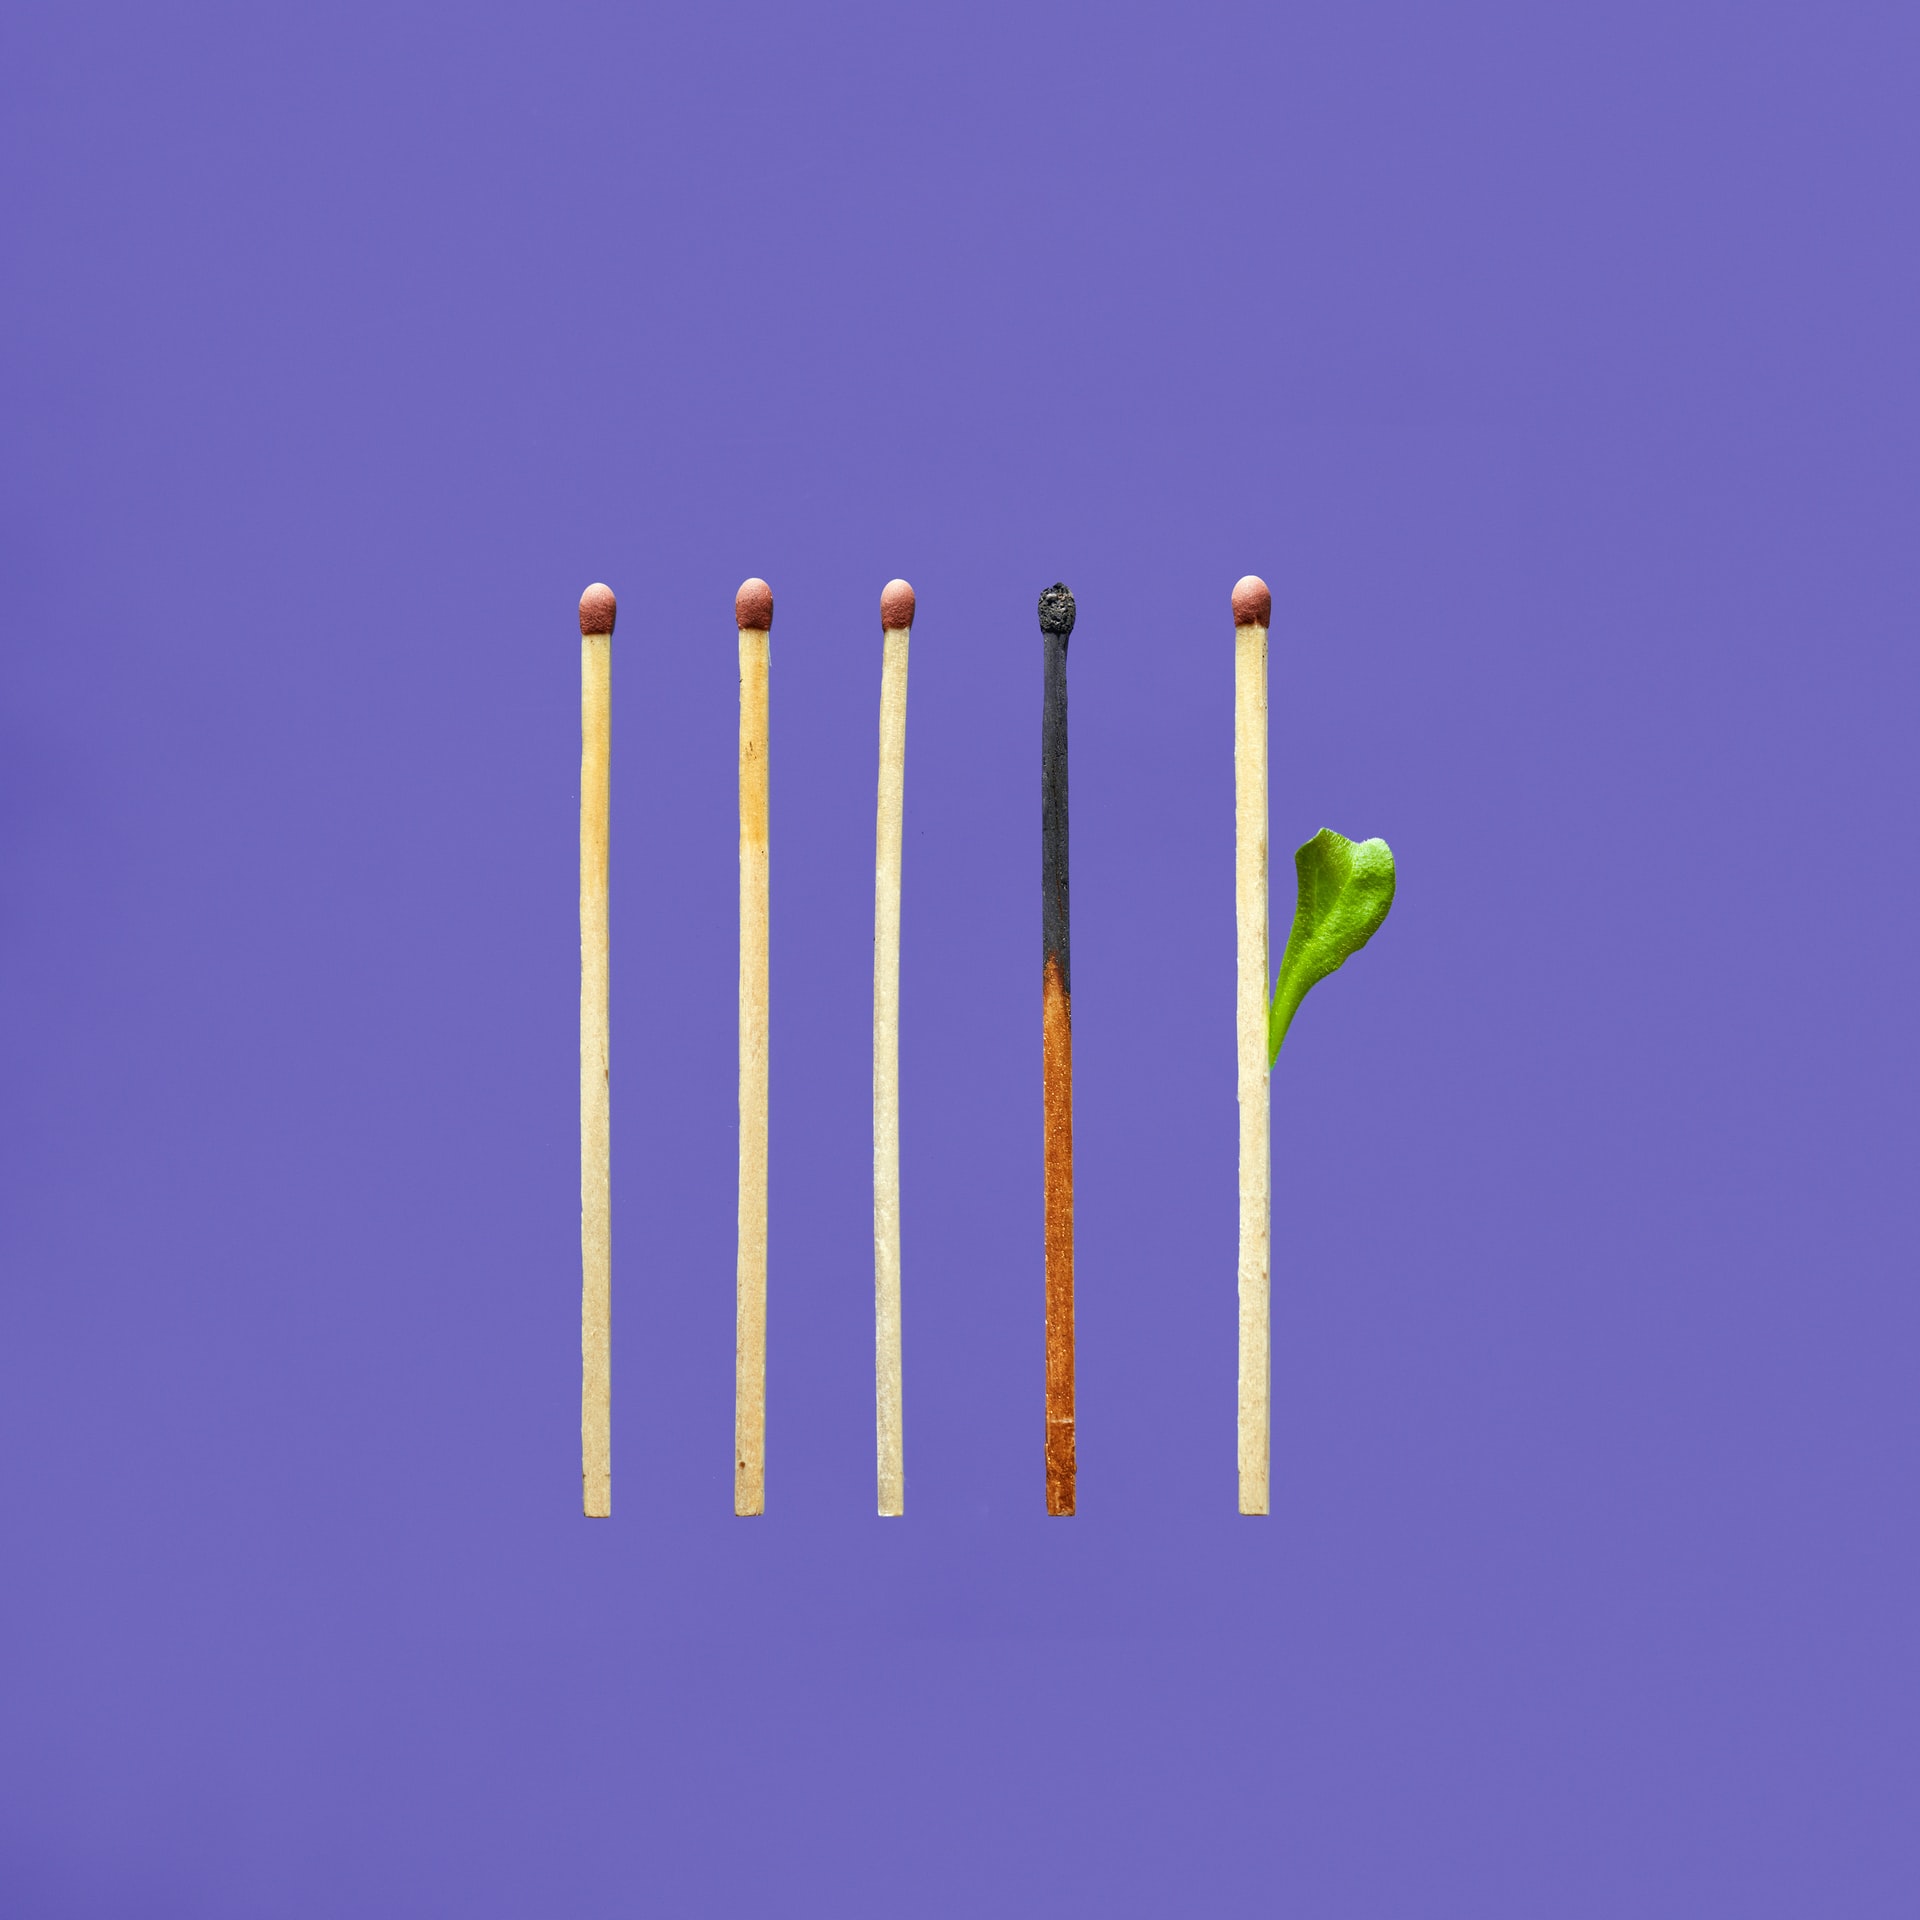 4 match sticks with one burnt out and one with a green leaf